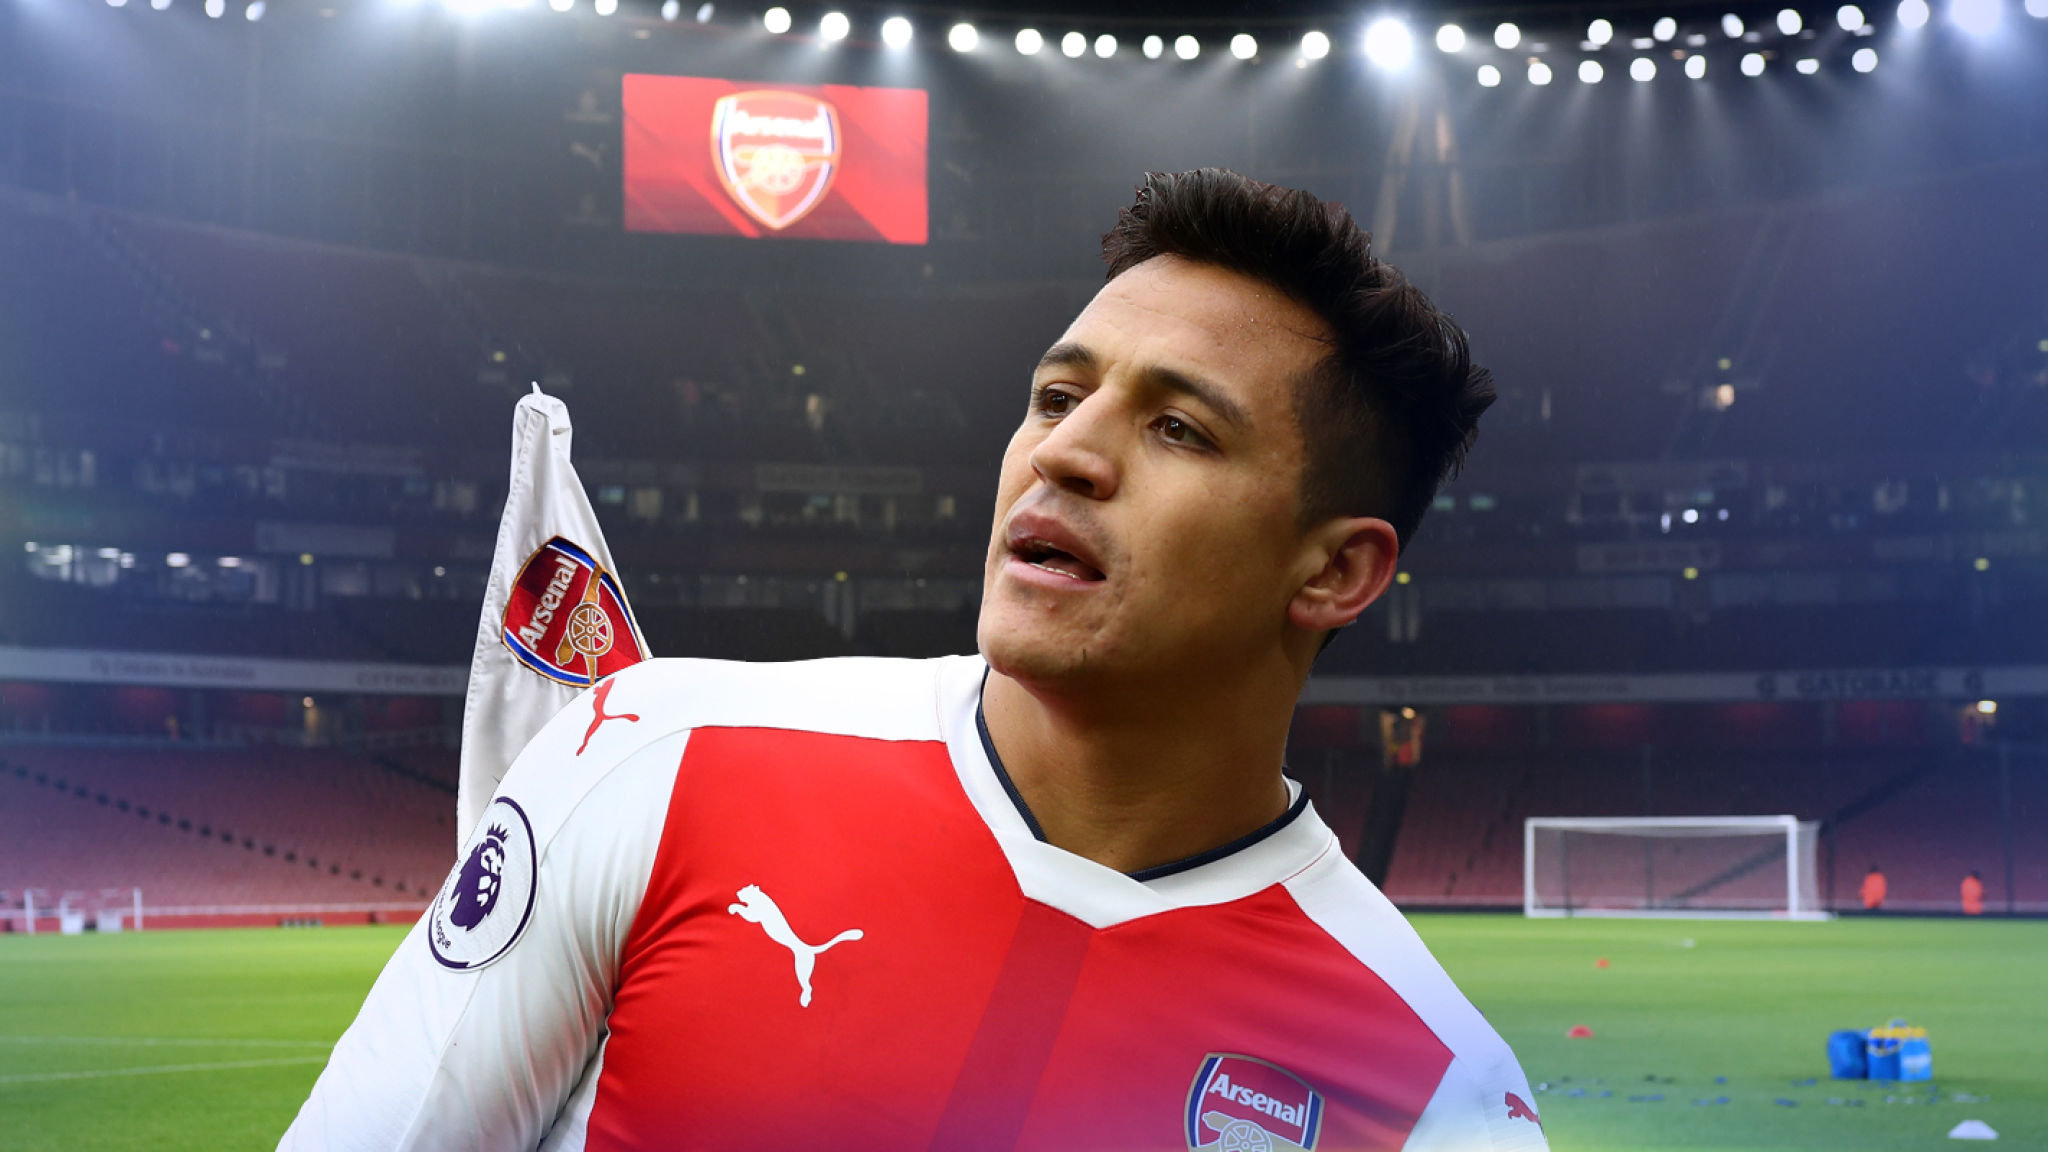 Alexis Sanchez S Future At Arsenal Is The Subject Of - Alexis Future At Arsenal - HD Wallpaper 